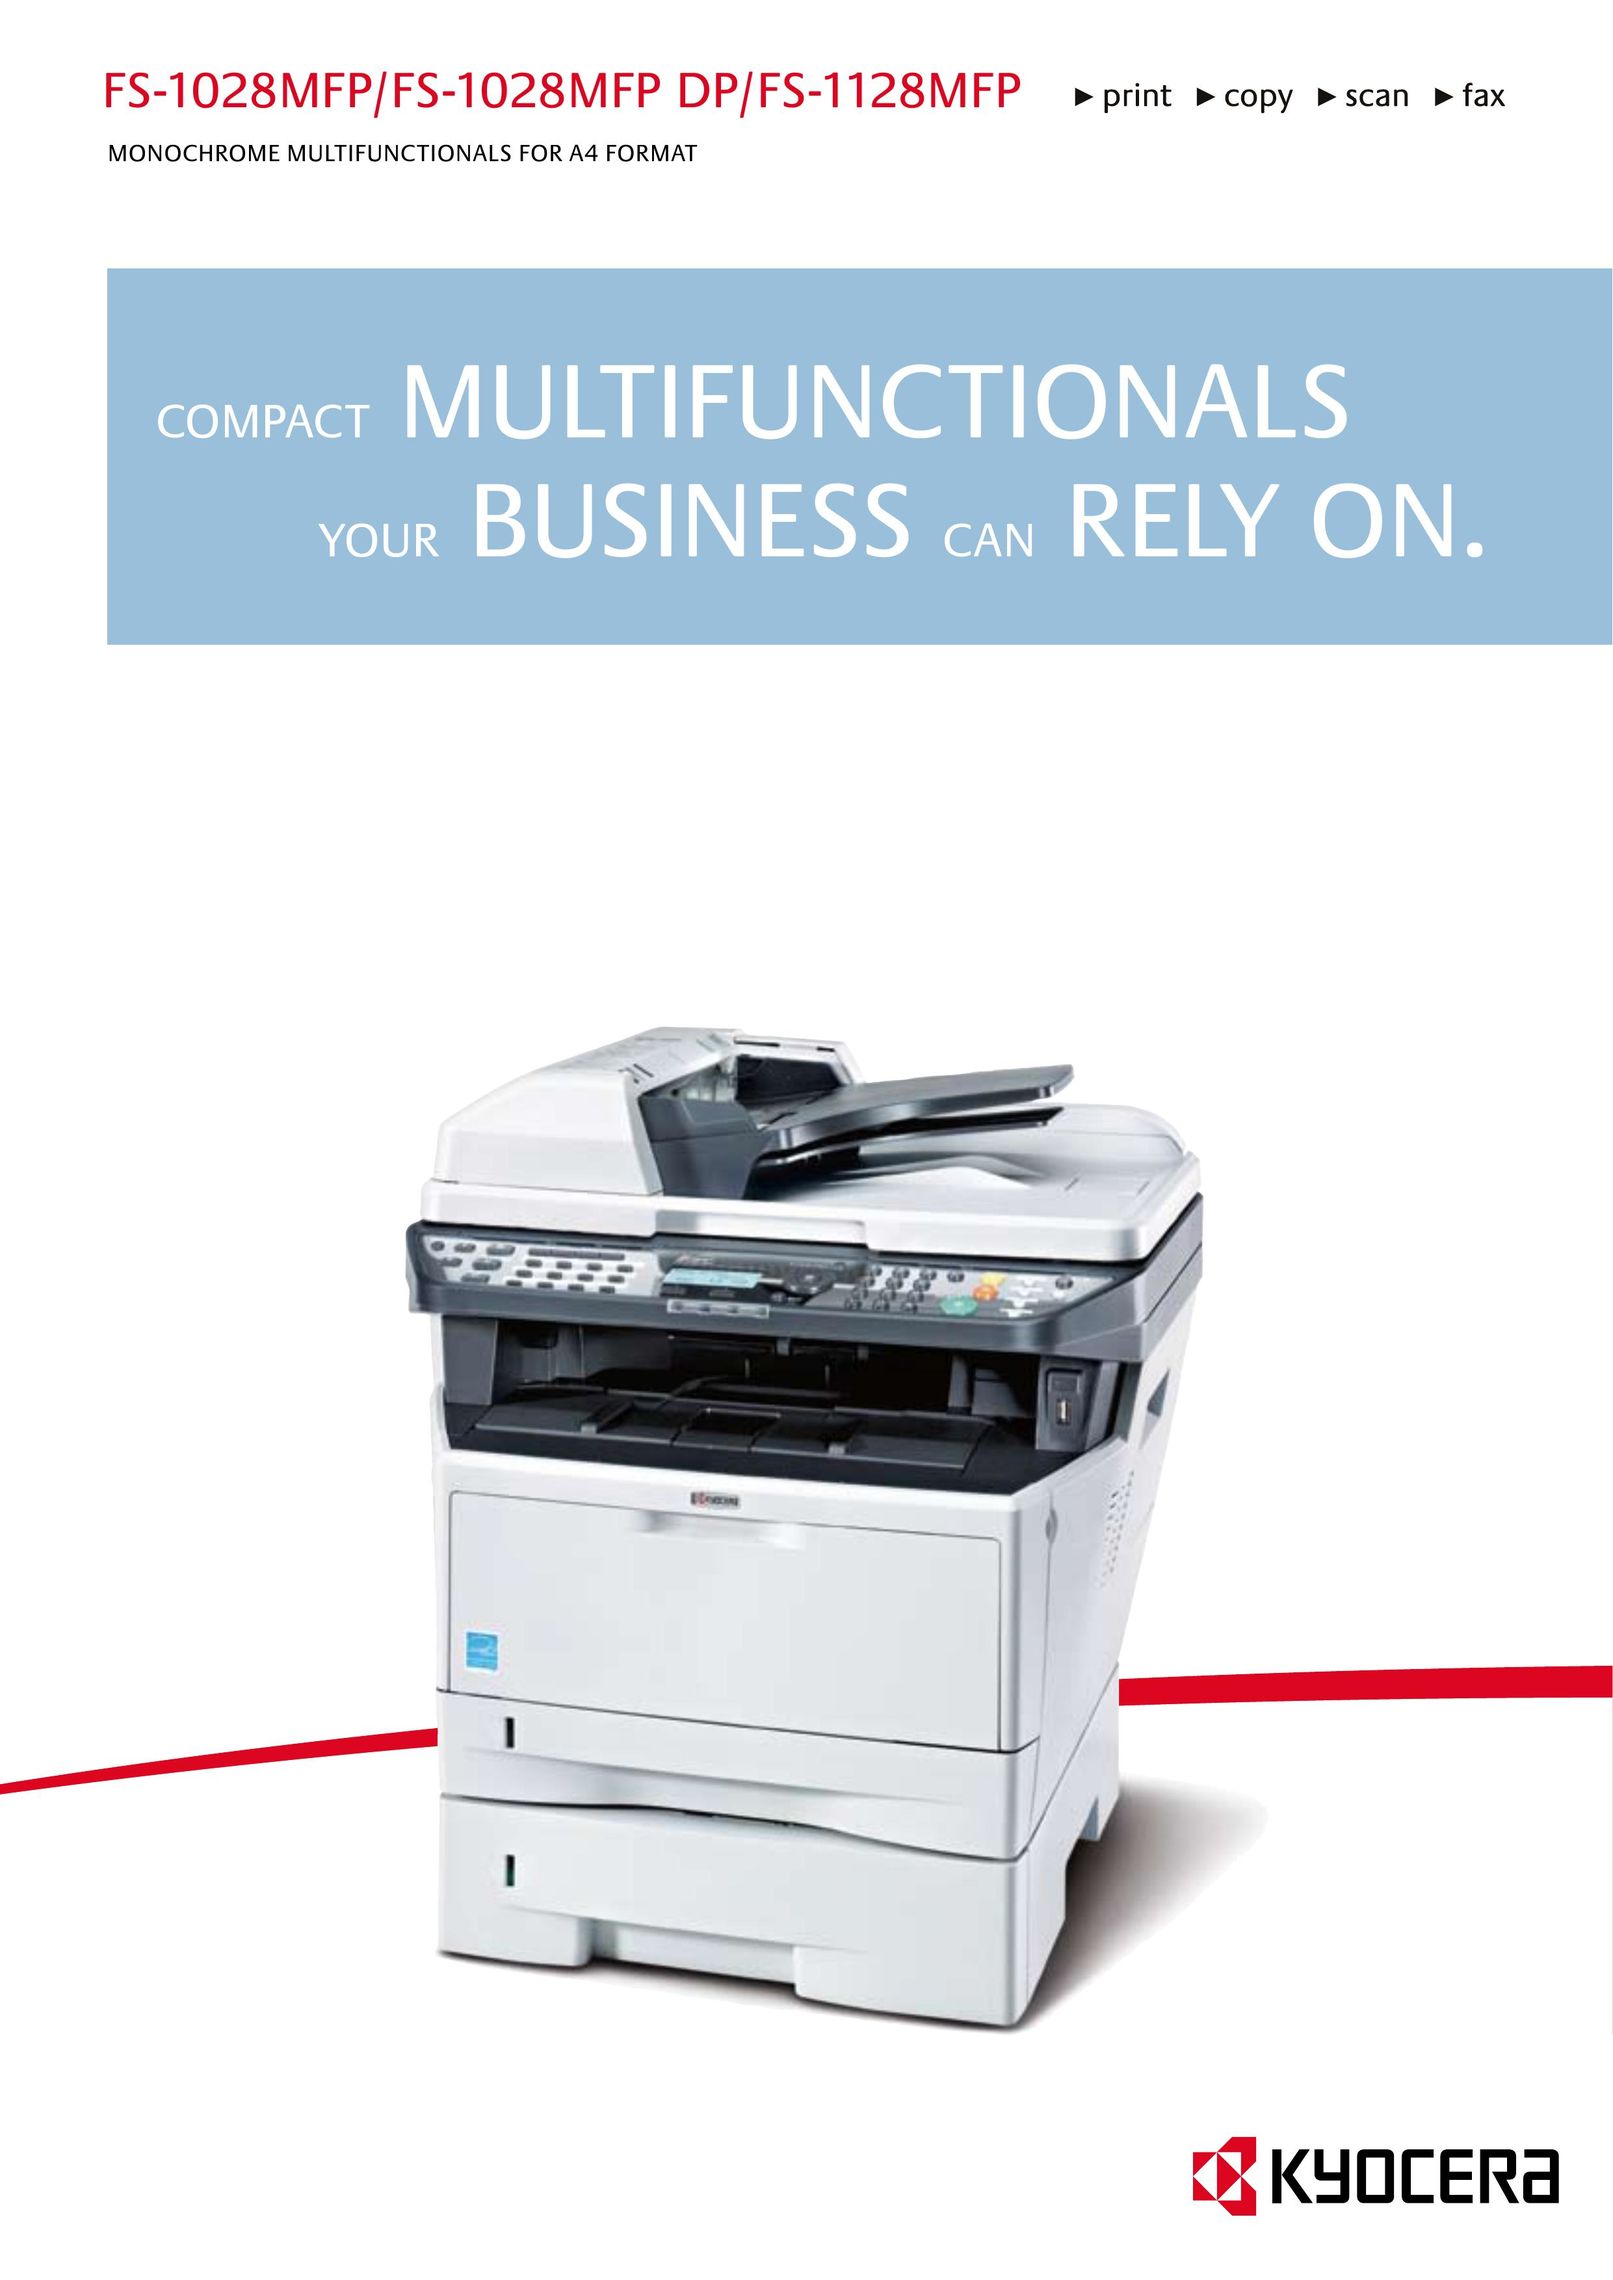 Kyocera FS-1028MFP All in One Printer User Manual (Page 1)